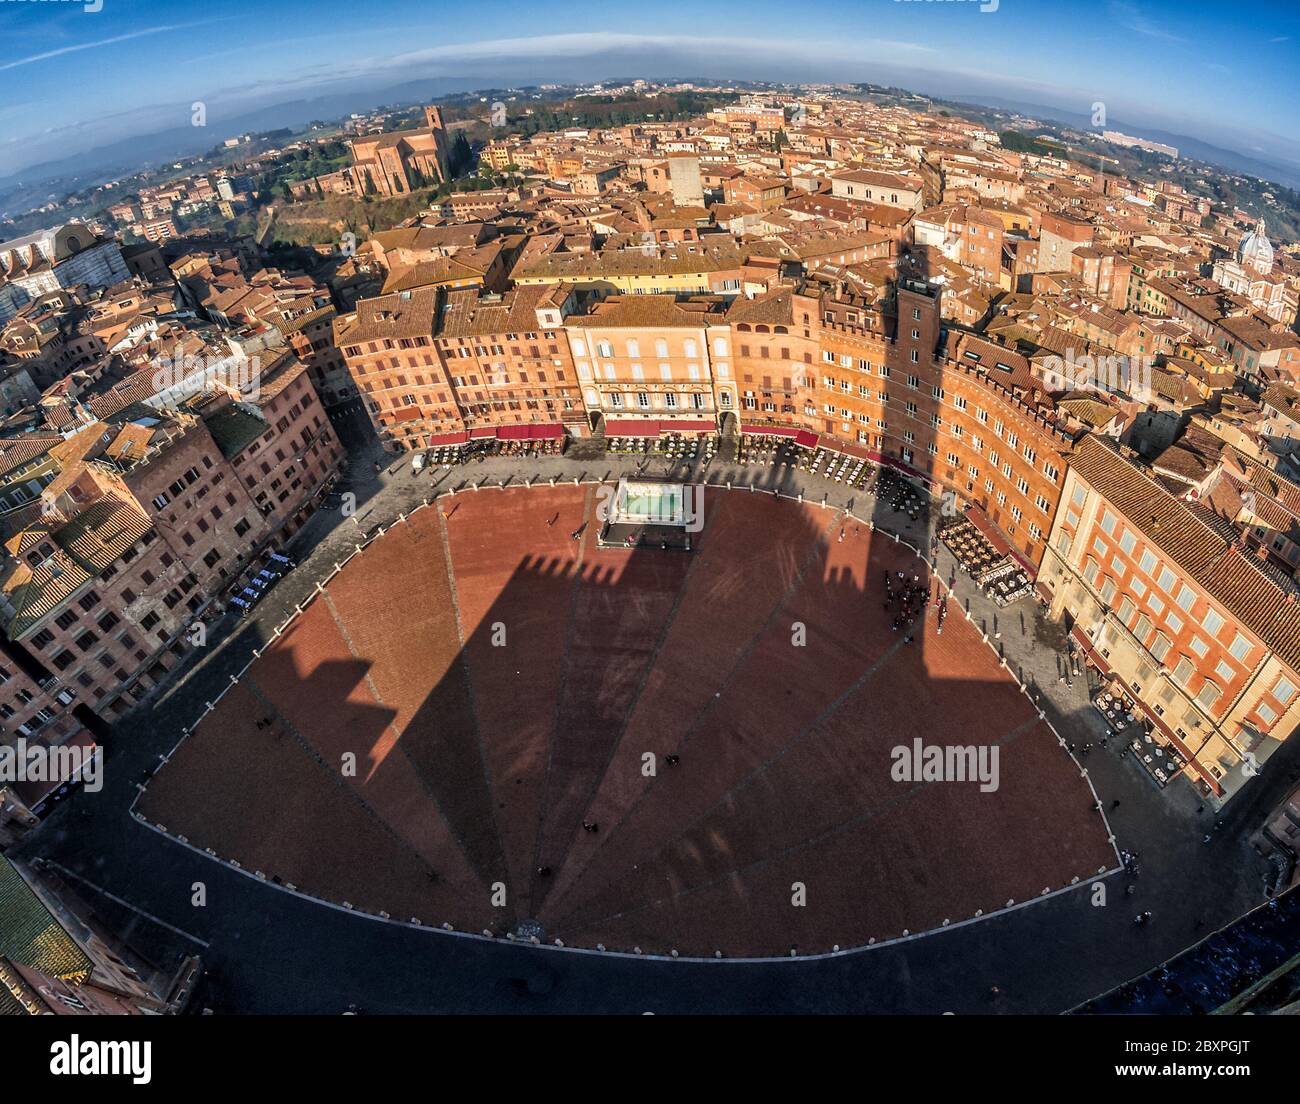 the famous Siena piazza del Campo view from the top of the tower with a fish eye shot Stock Photo